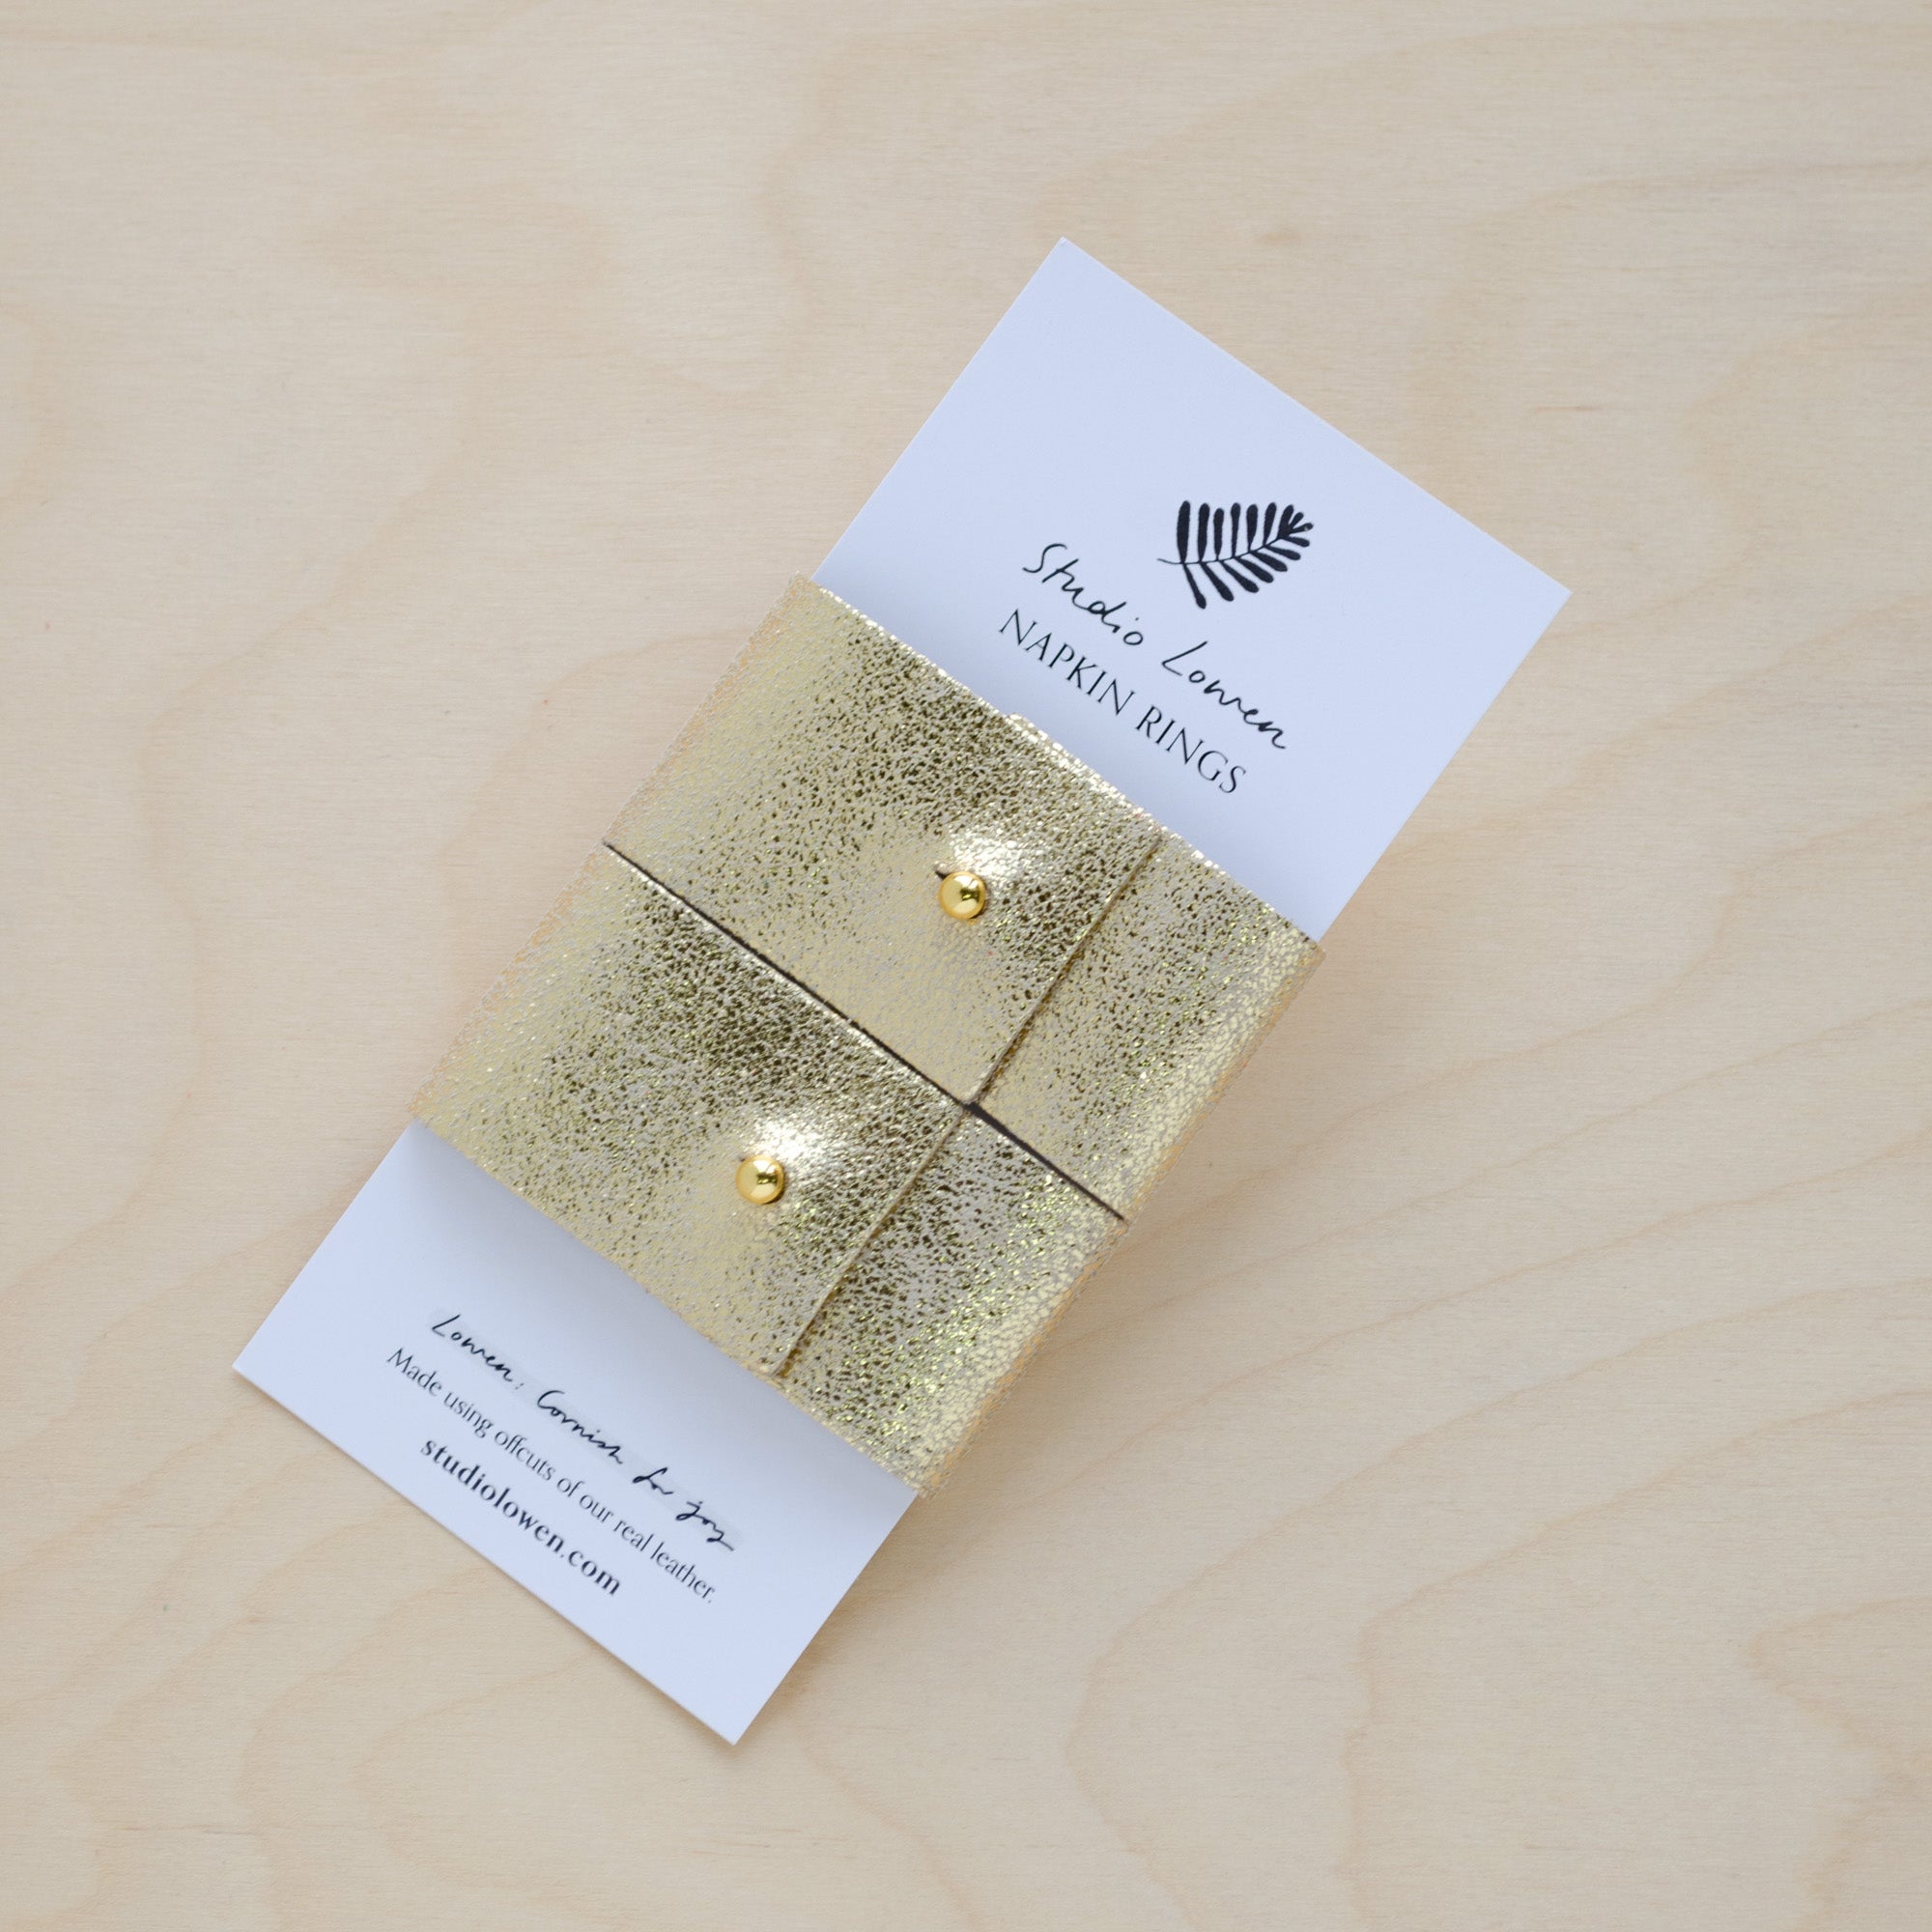 Pair of gold leather napkin rings in a metallic gold leather with a gold stud on white packaging.